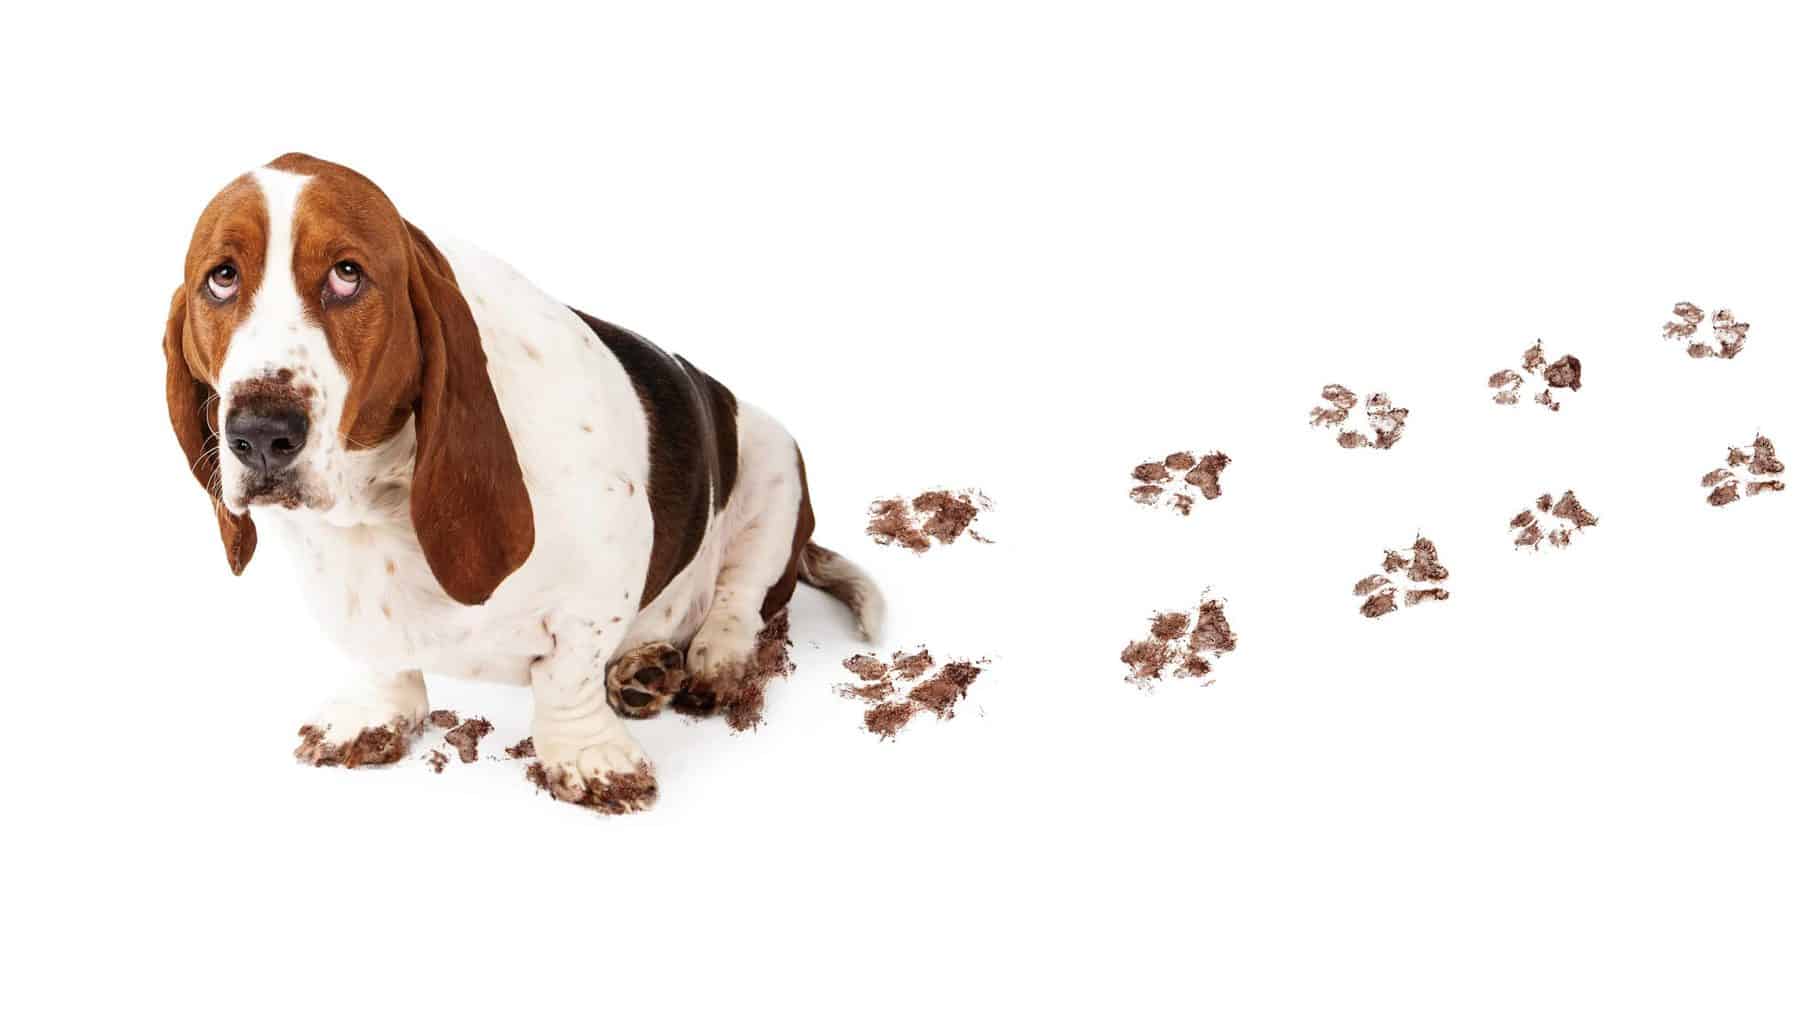 Bassett Hound leaves muddy footprints. To help clean up after your dog, wipe or rinse muddy paws before you let the dog inside.